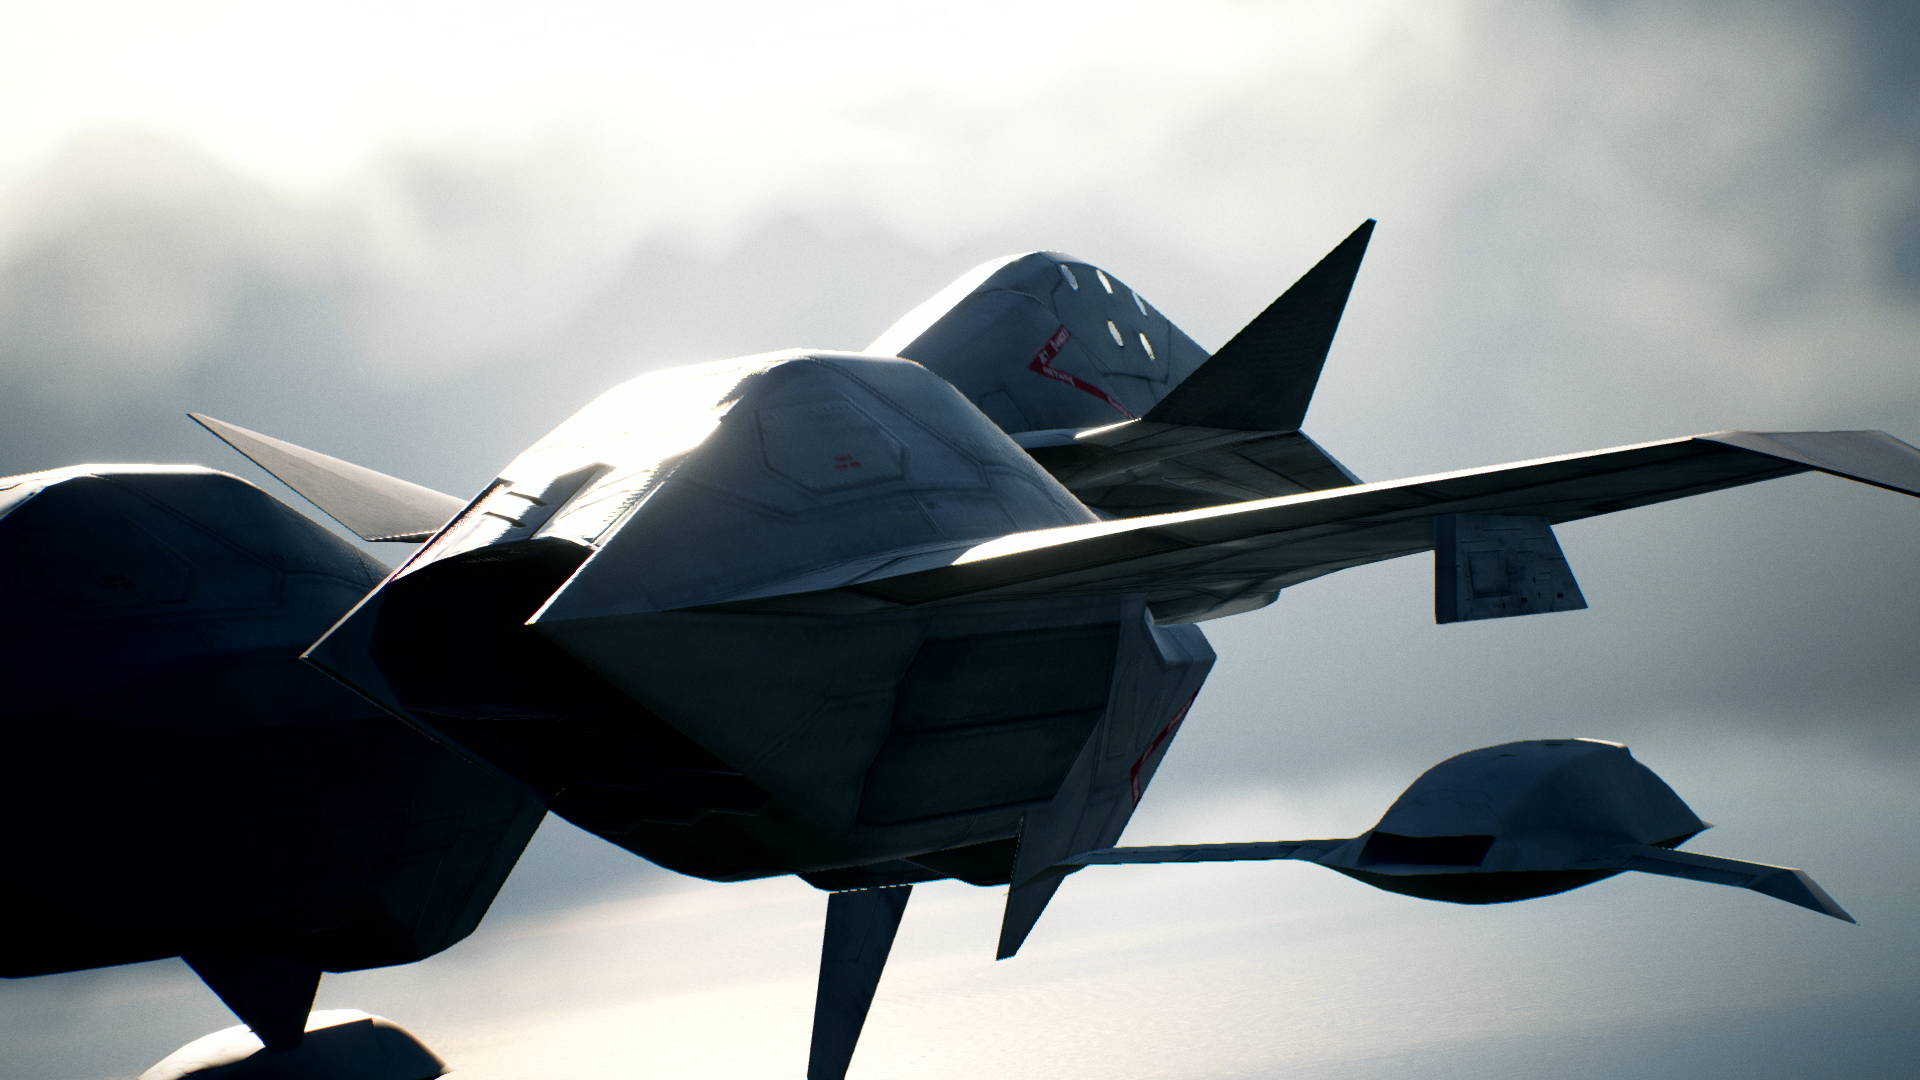 Ace Combat 7: Skies Unknown shipments and digital sales top two